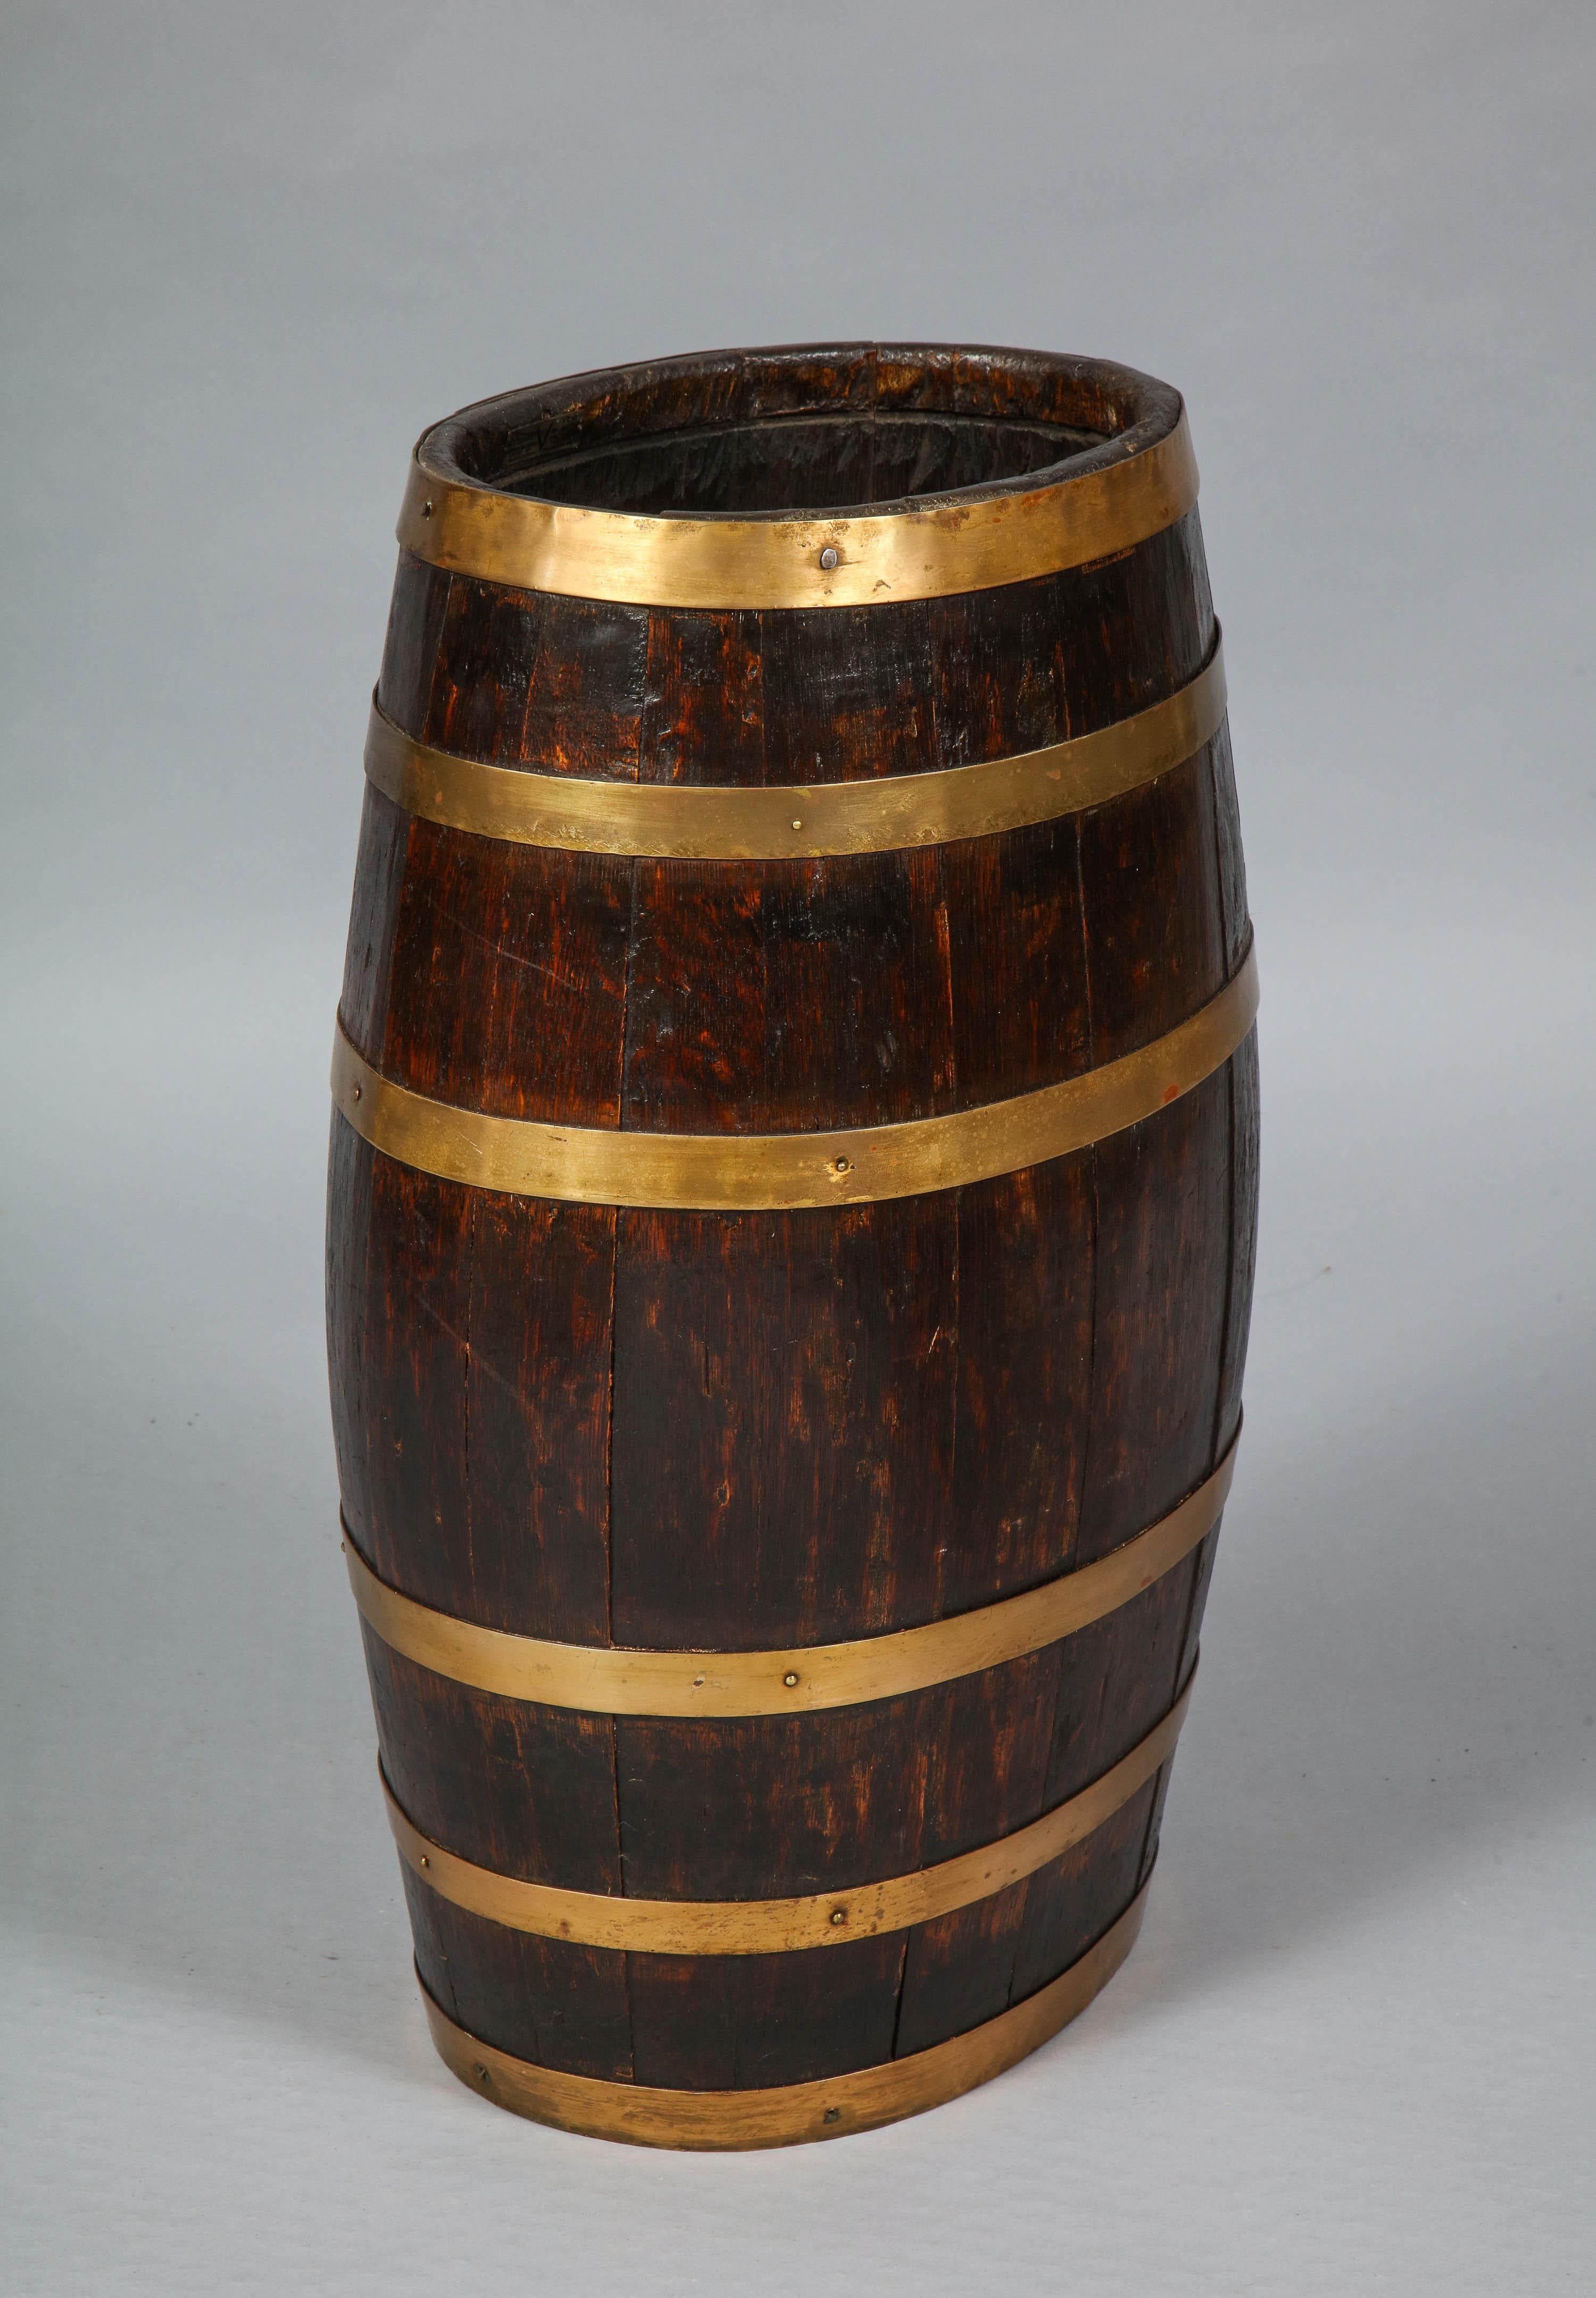 Good English 19th century barrel with original brass banding, of swelled form, the timber with good rich color and patination. Ideal umbrella or stick stand.